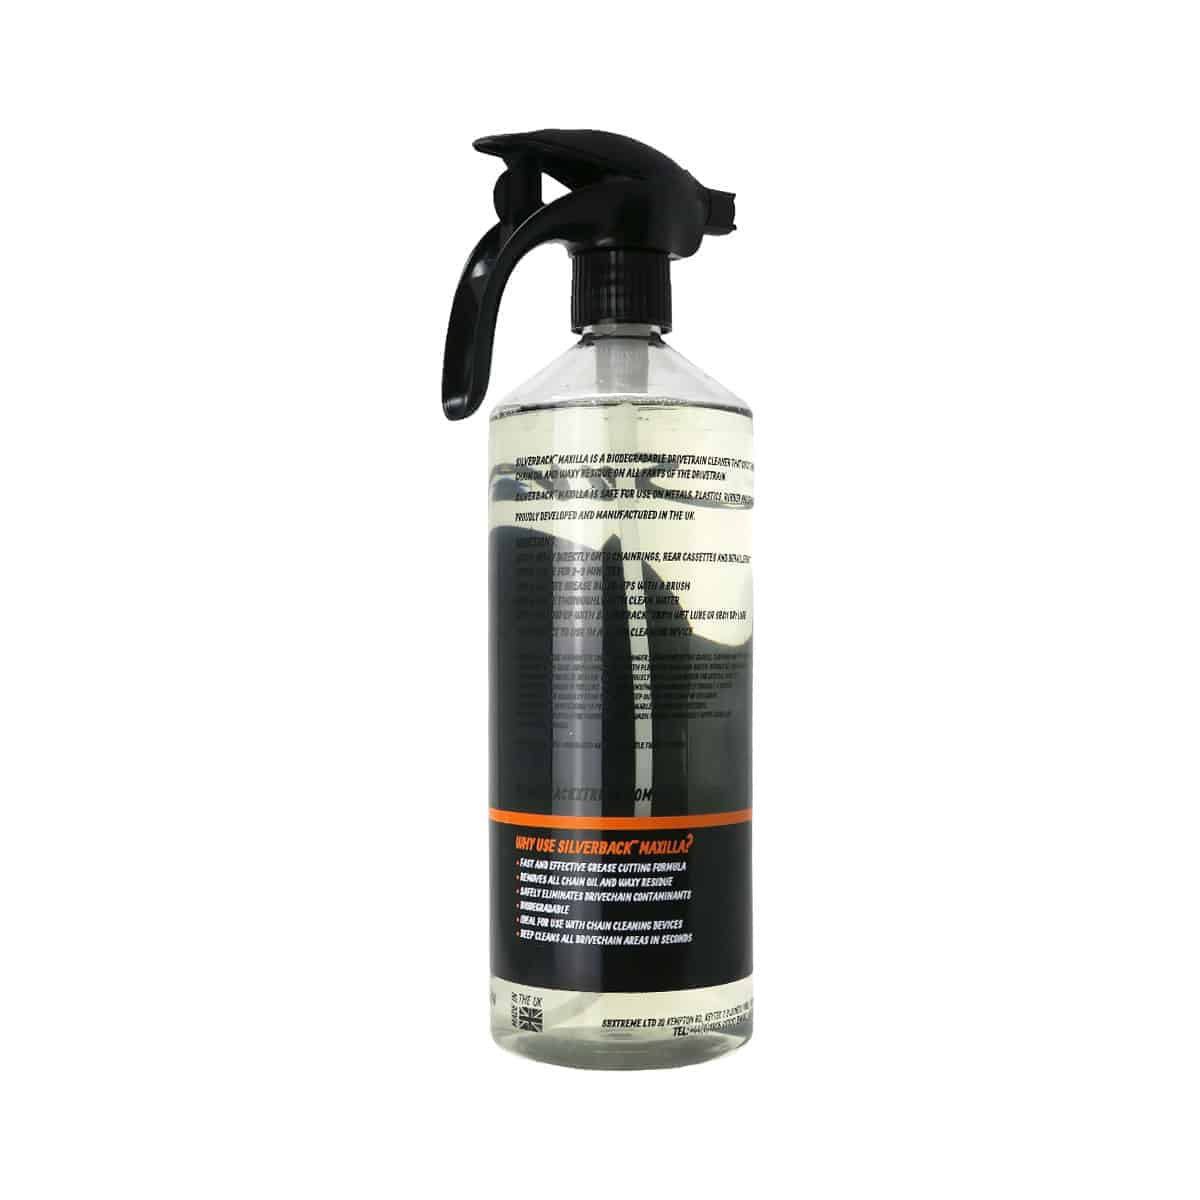 Silverback Xtreme Maxilla Drivetrain Cleaner: Powerful degreaser that is gentle on seals & hoses back